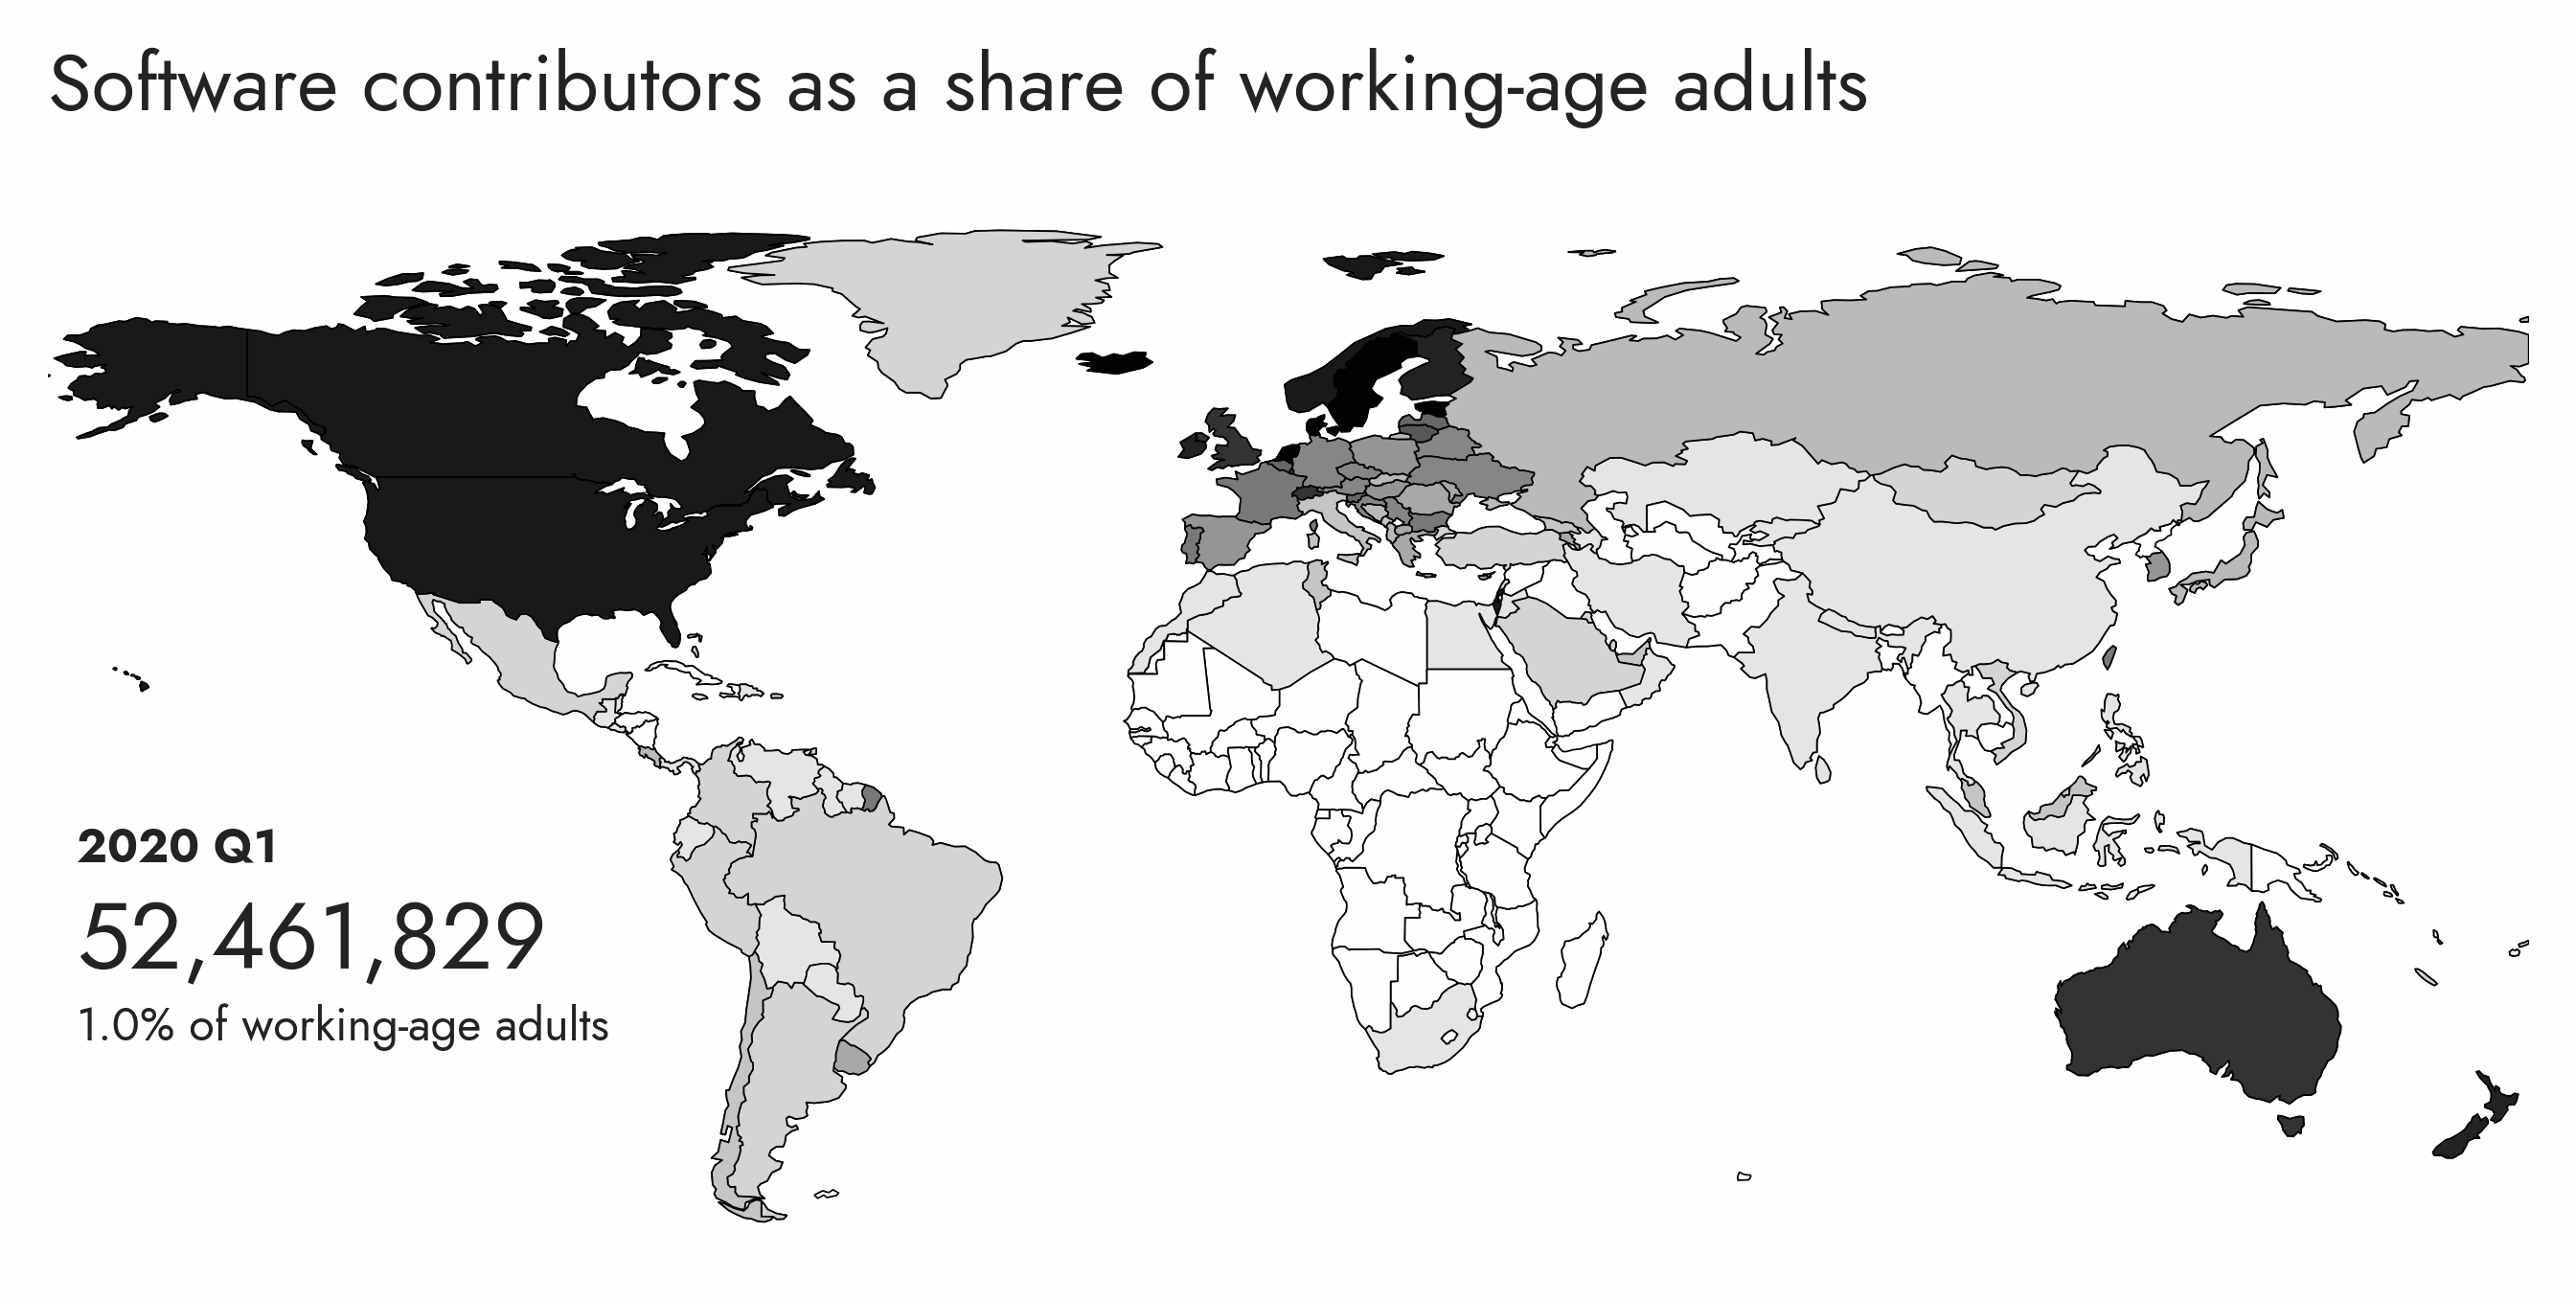 Gif showing the share of working age population that are contributors to open source software overtime by countries of the work over the last few years.  Share rises from about 1 to 2% in most countries and concentrates in North America, Europe, Oceania and East Asia, especially Taiwan. 
 